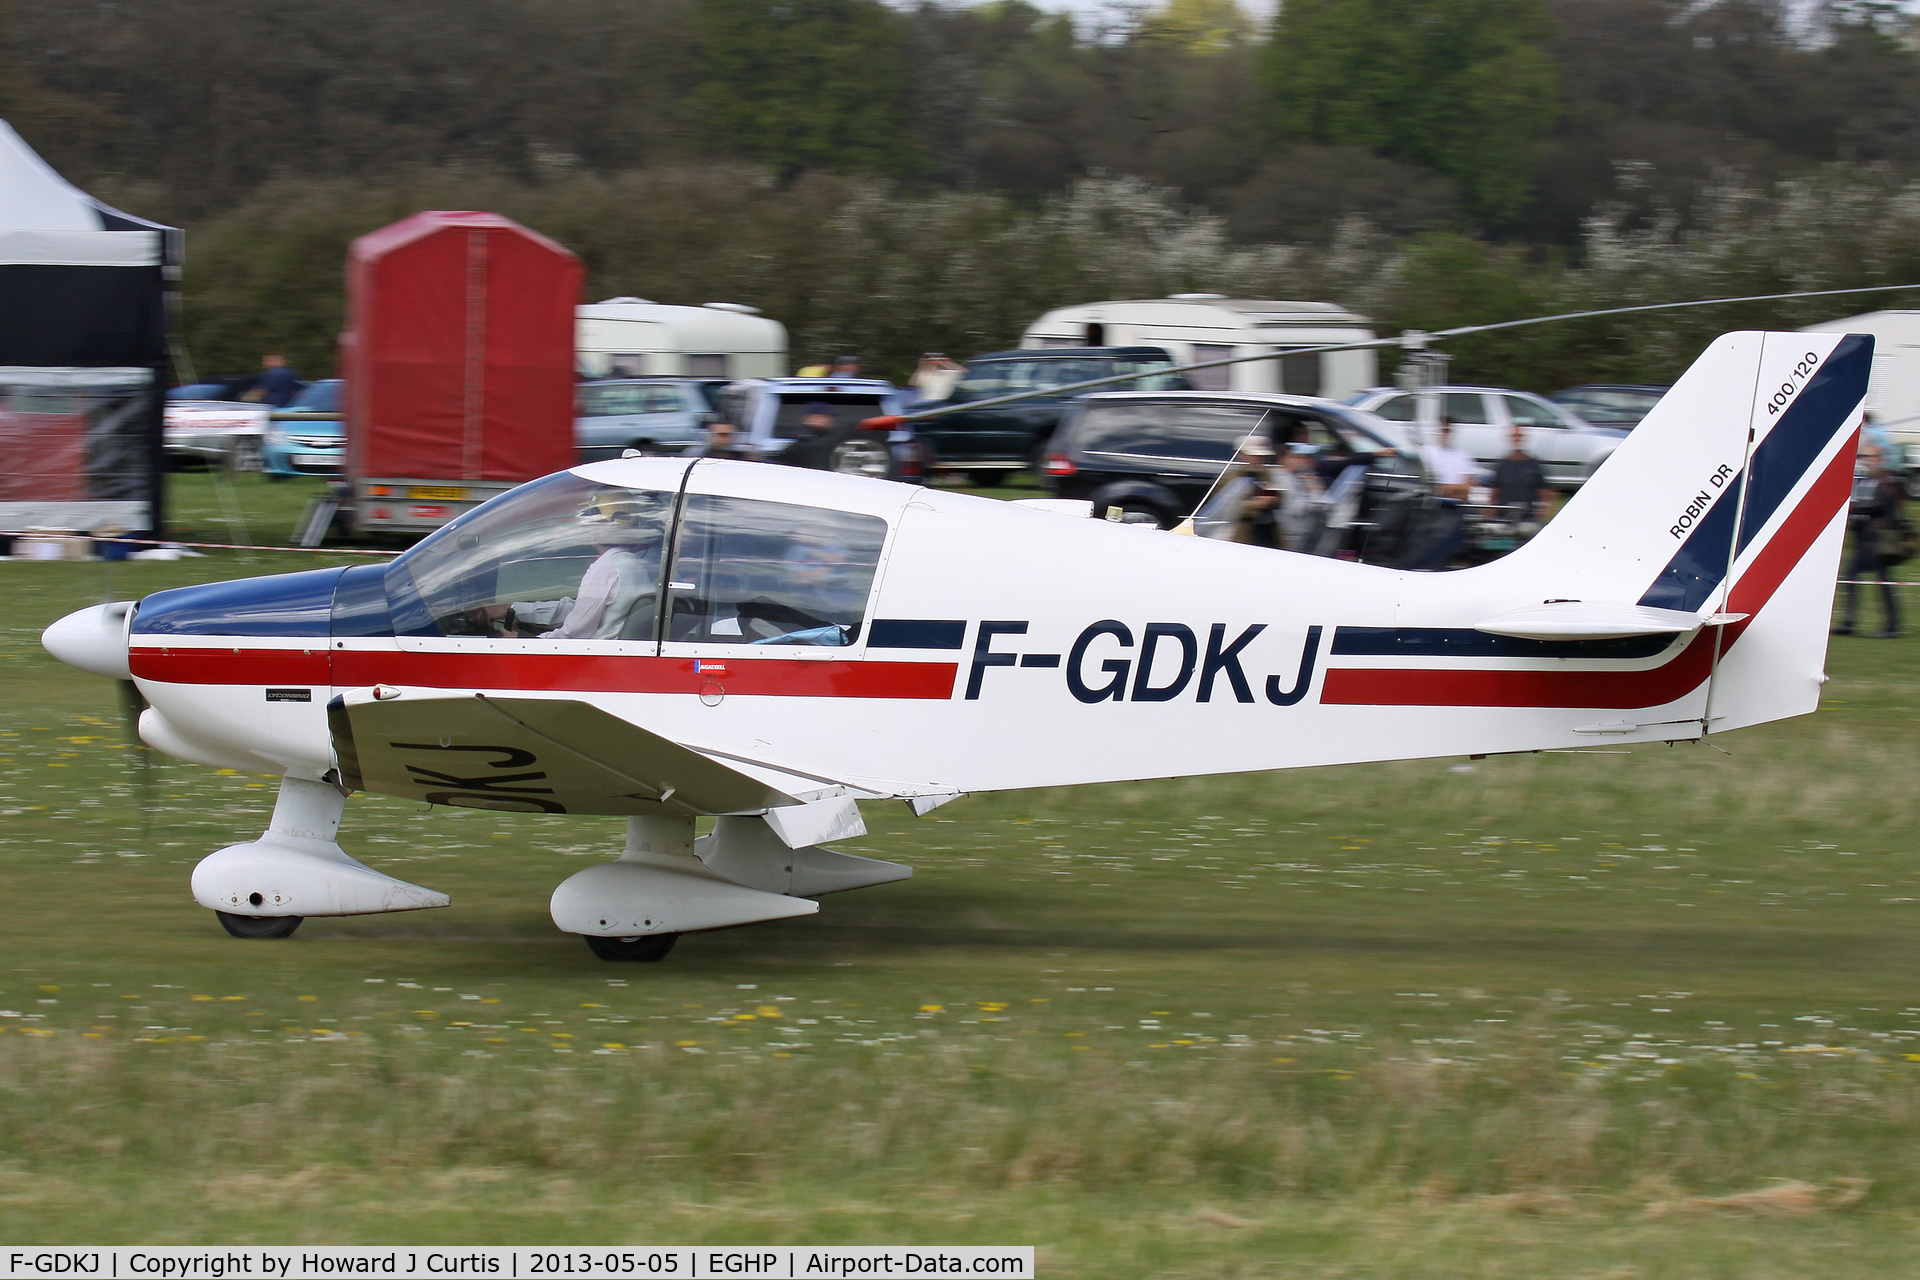 F-GDKJ, 1983 Robin DR-400-120 Petit Prince C/N 1612, Privately owned. At the microlight trade fair.